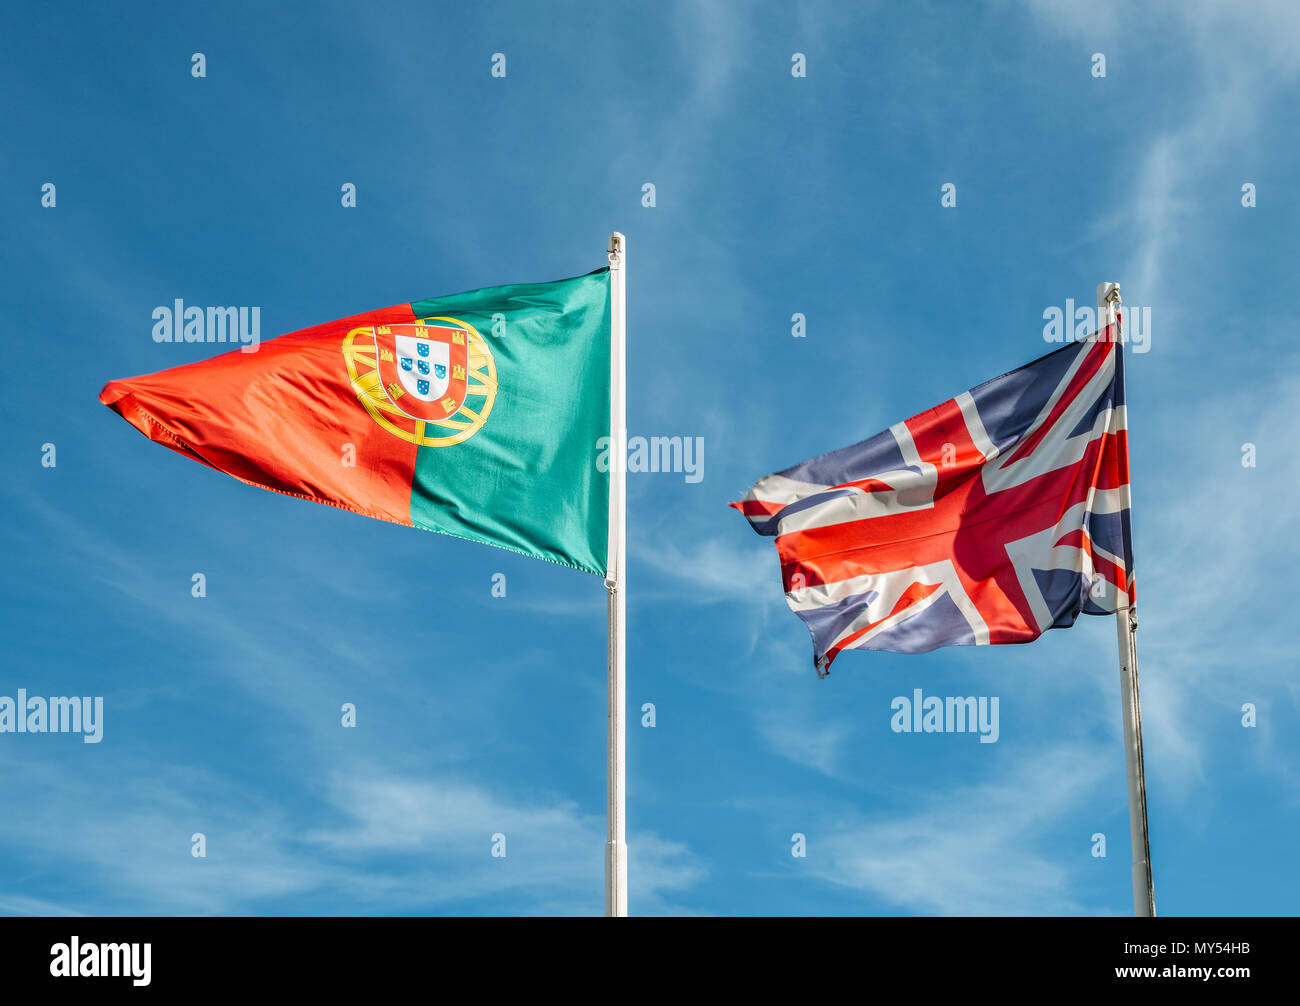 England and Portugal flag together on a mast against a blue sky Stock Photo